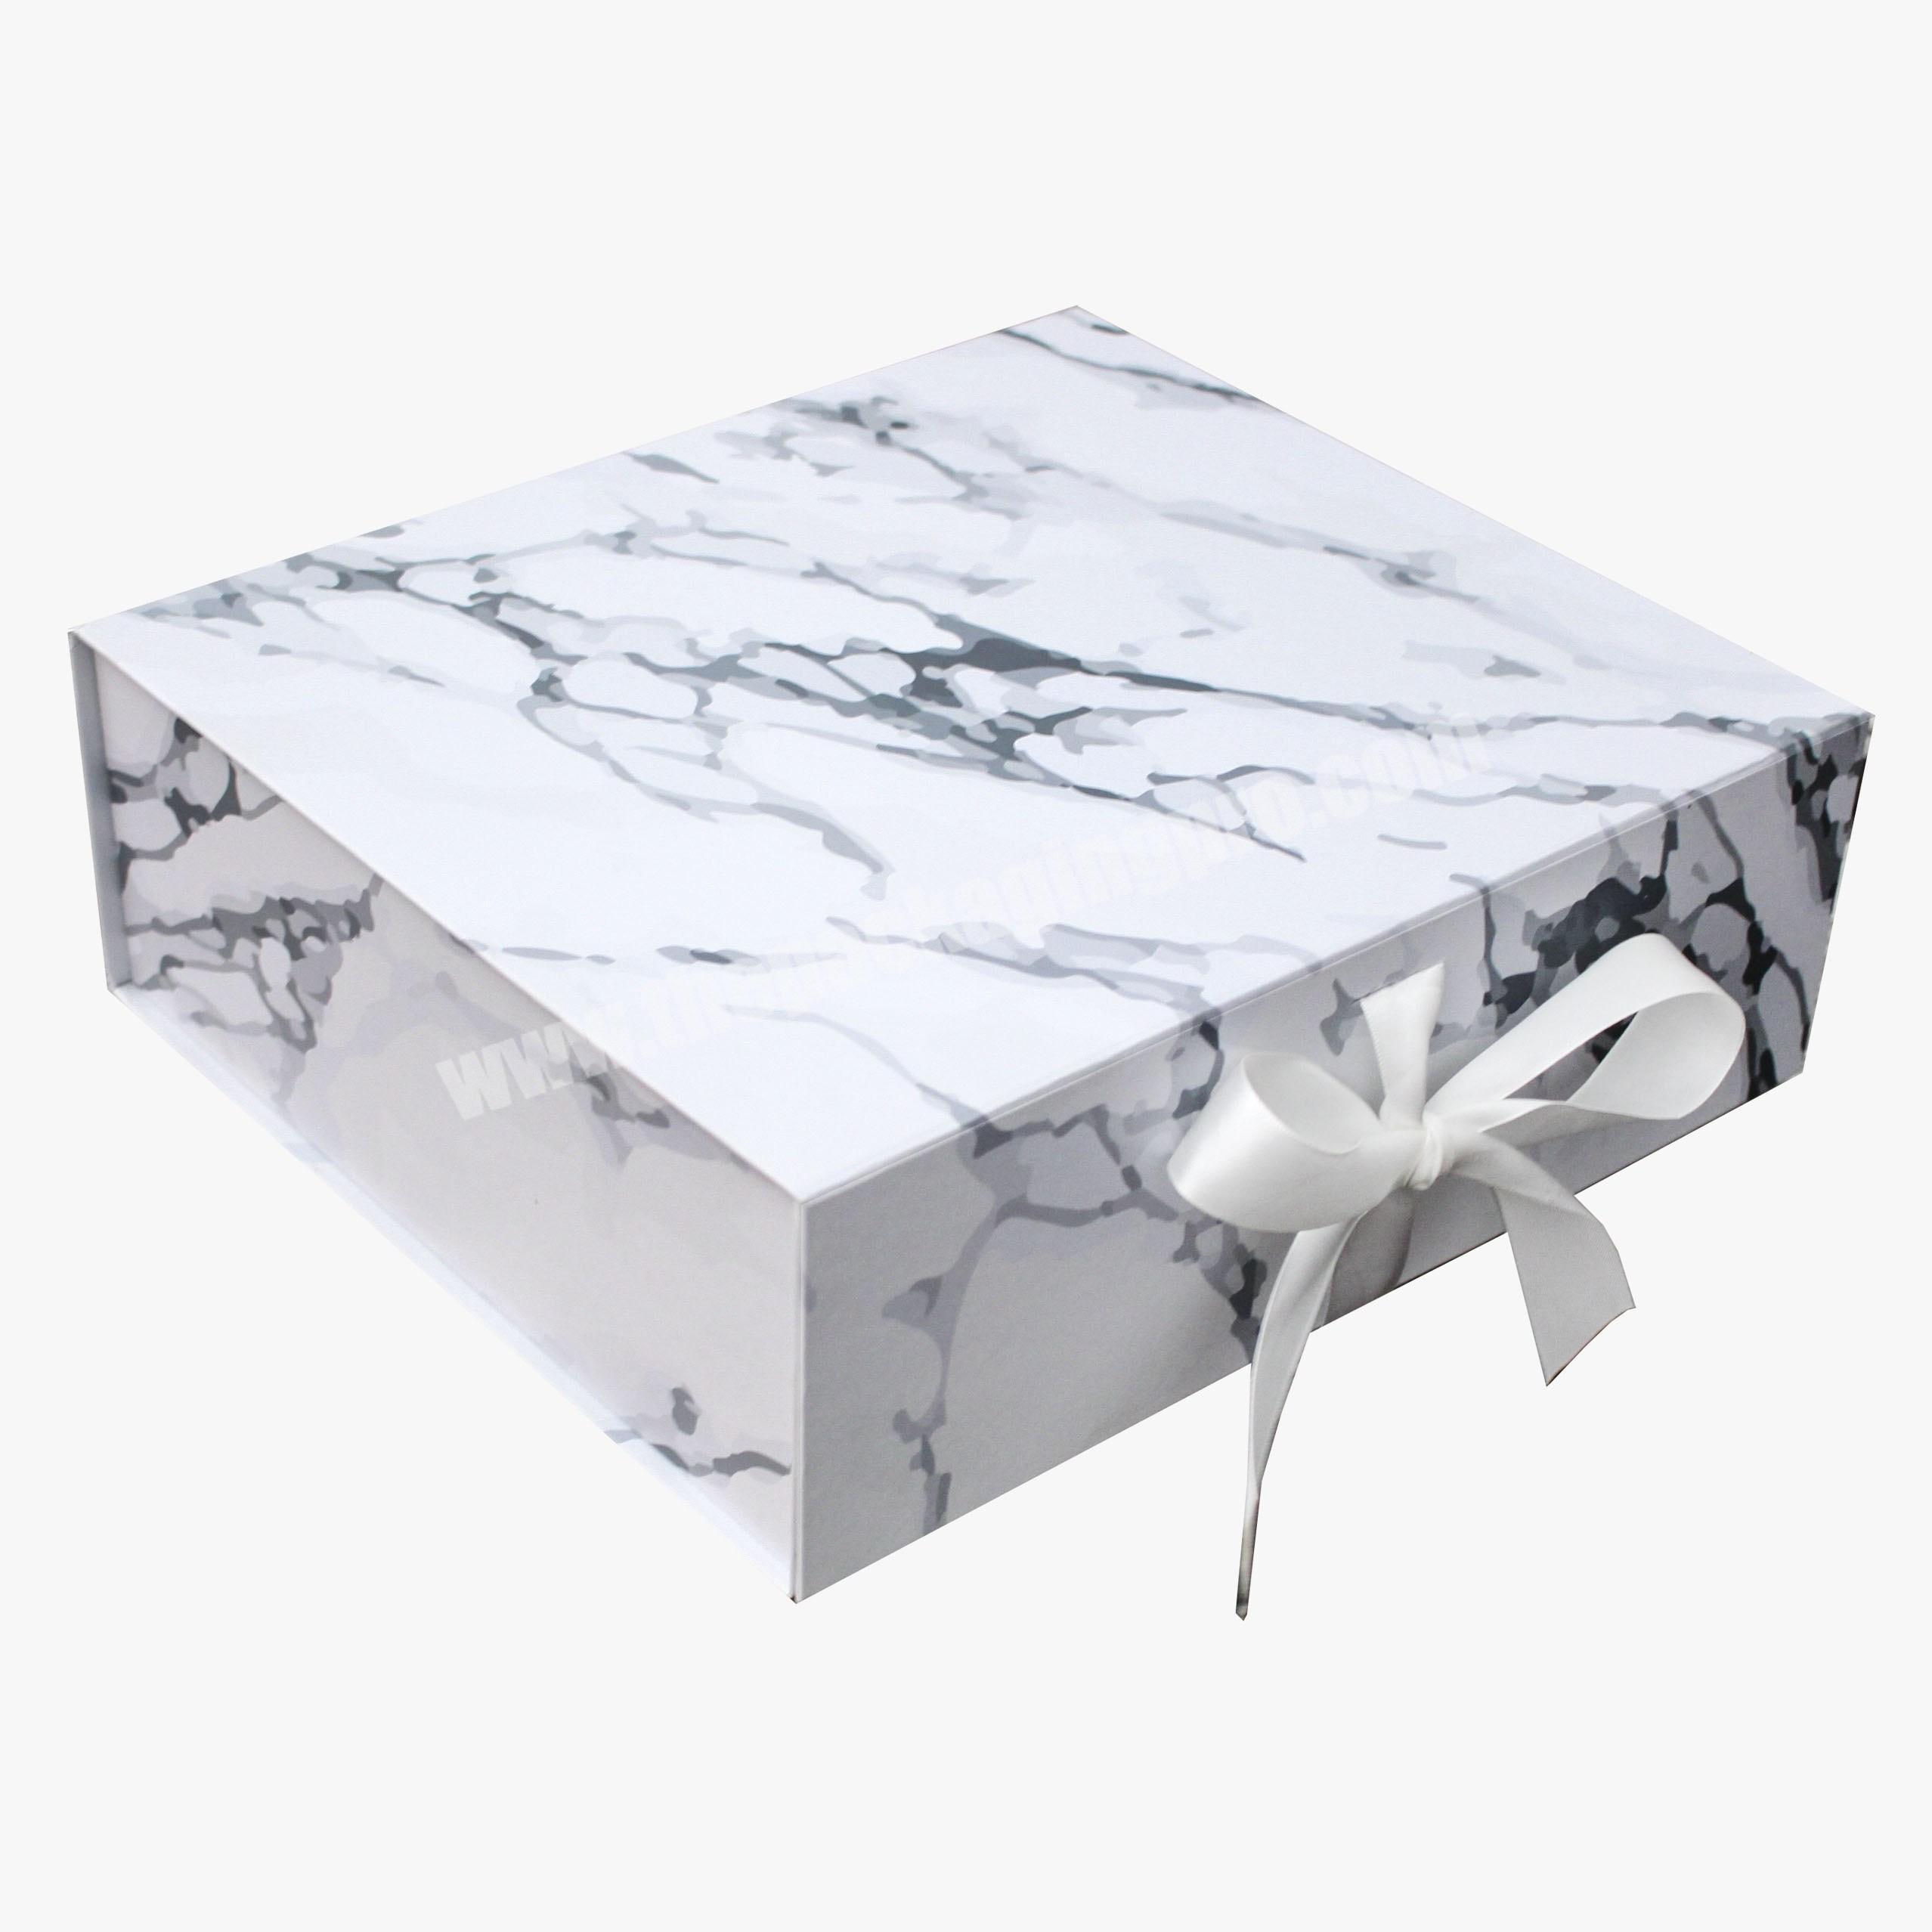 Hot Sales Ivory White Marble Printed Handmade Gift Paper Box Dress Packaging Box With Ribbon